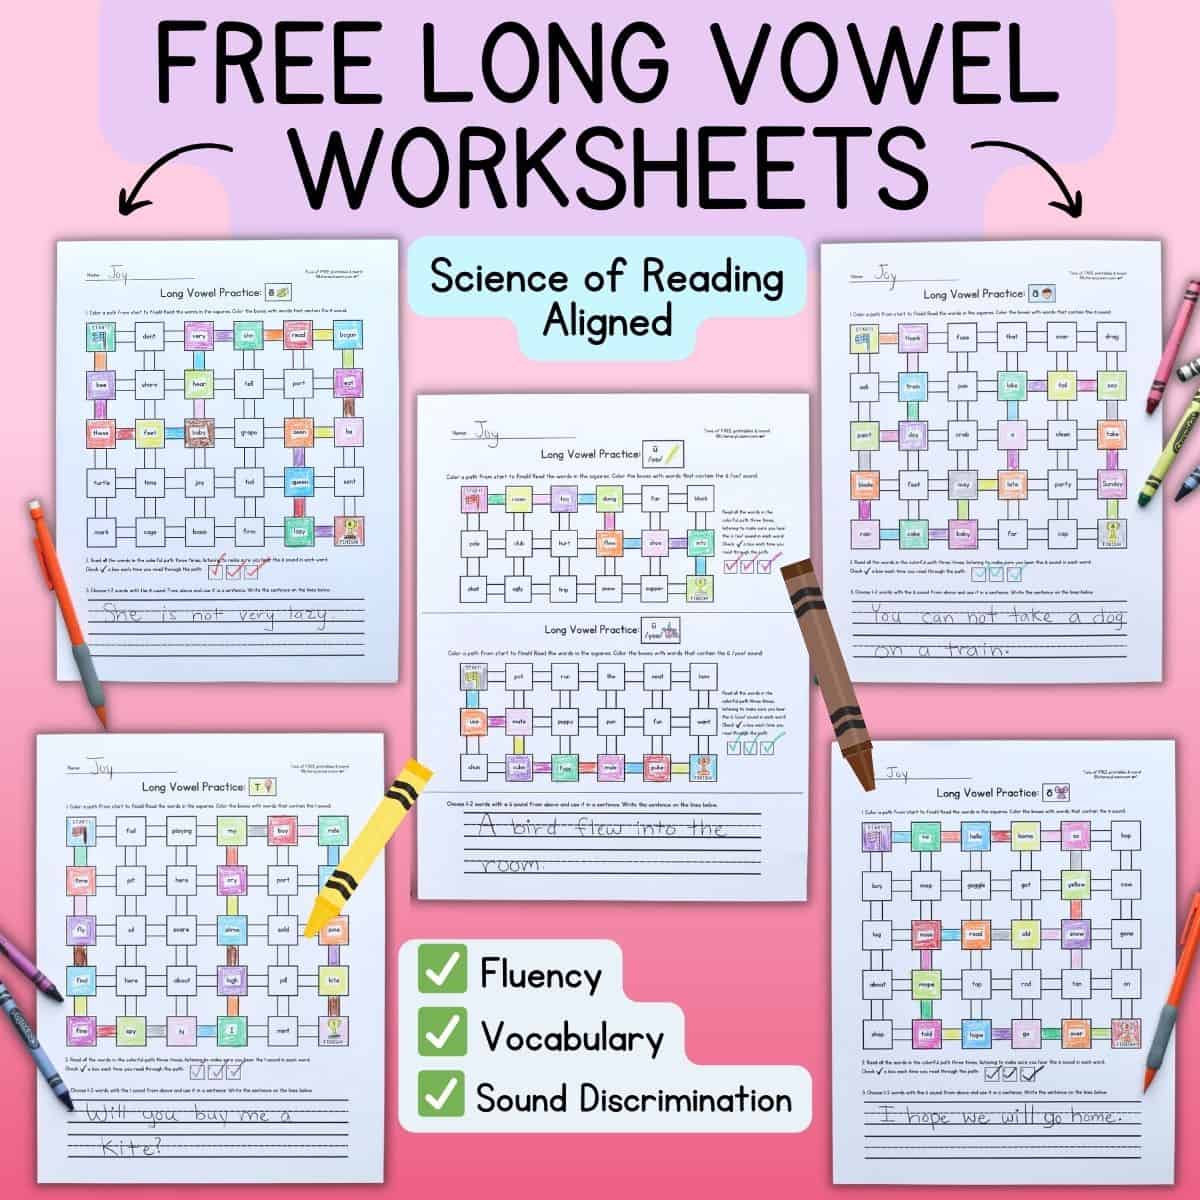 Long Vowels Archives - Literacy Learn